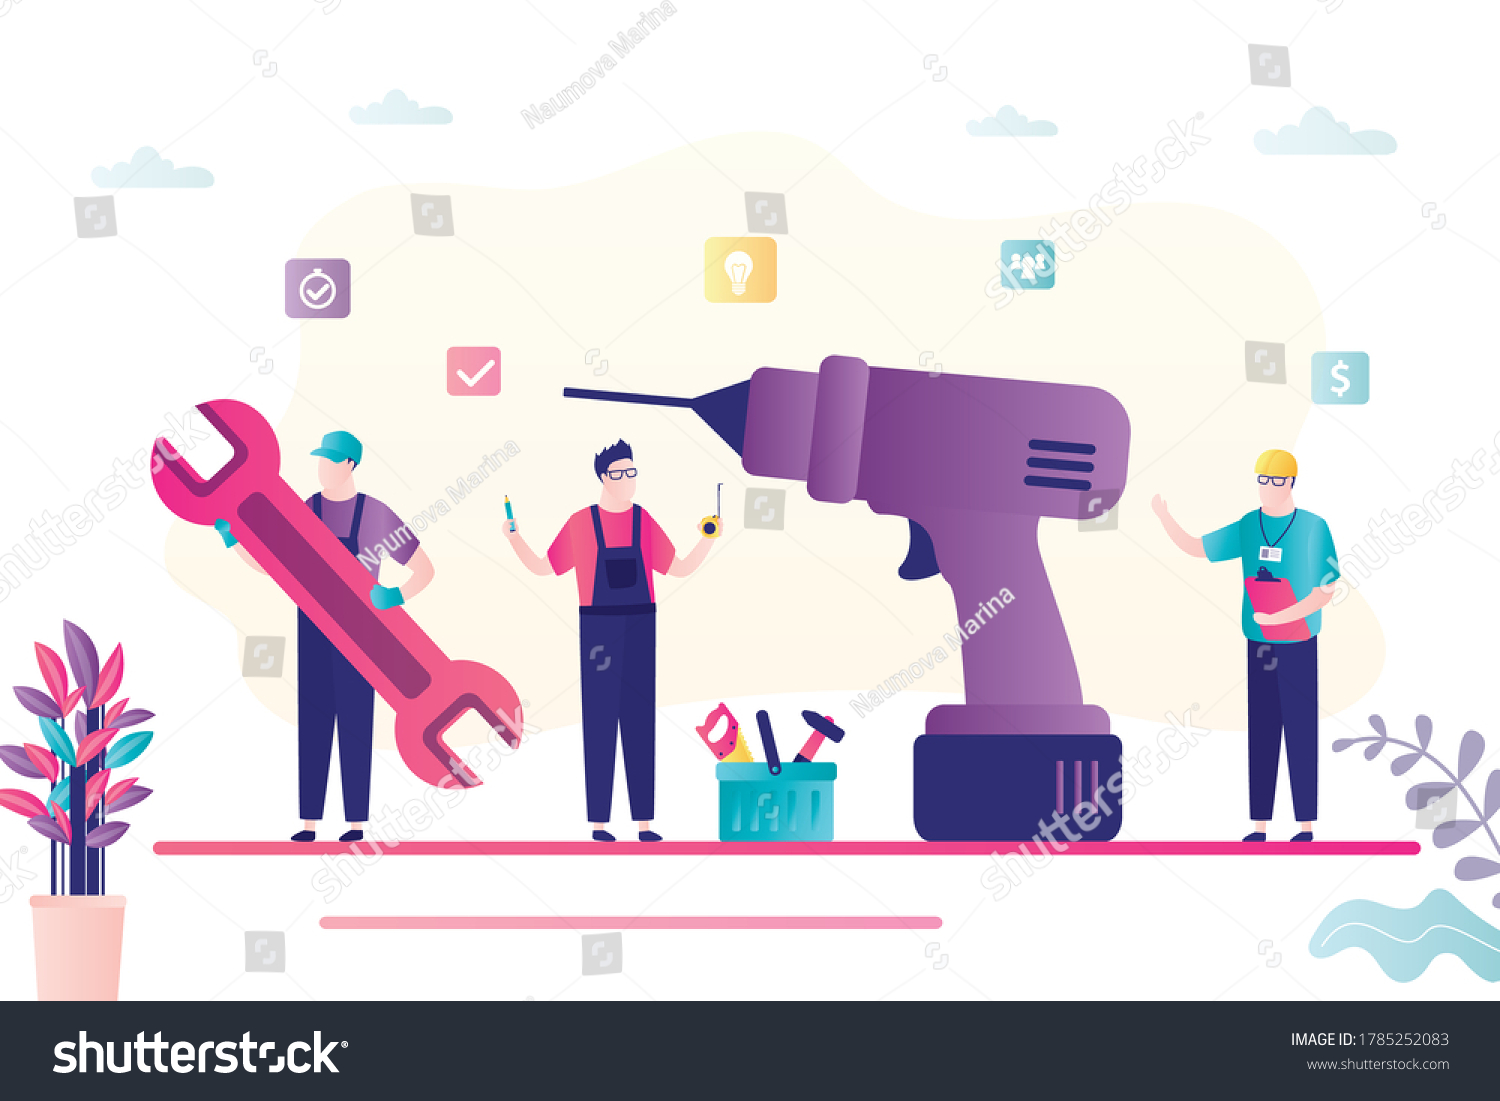 SVG of Big drill and team of servicemen in uniform. Group of repairman with various tools. Repair service, banner template. Male workers and toolbox nearby in trendy style. Flat vector illustration svg